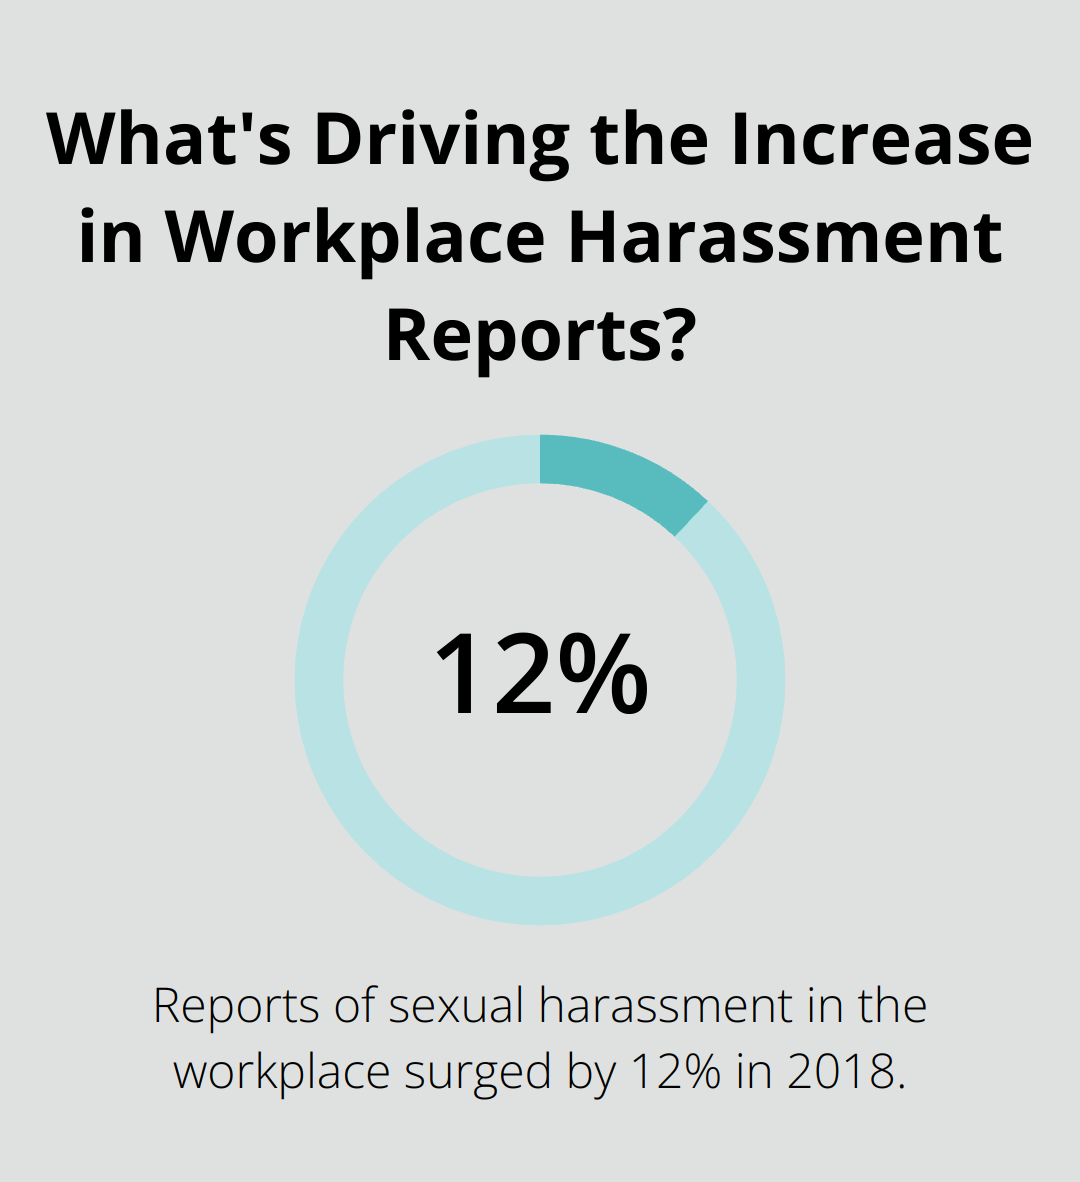 What's Driving the Increase in Workplace Harassment Reports?